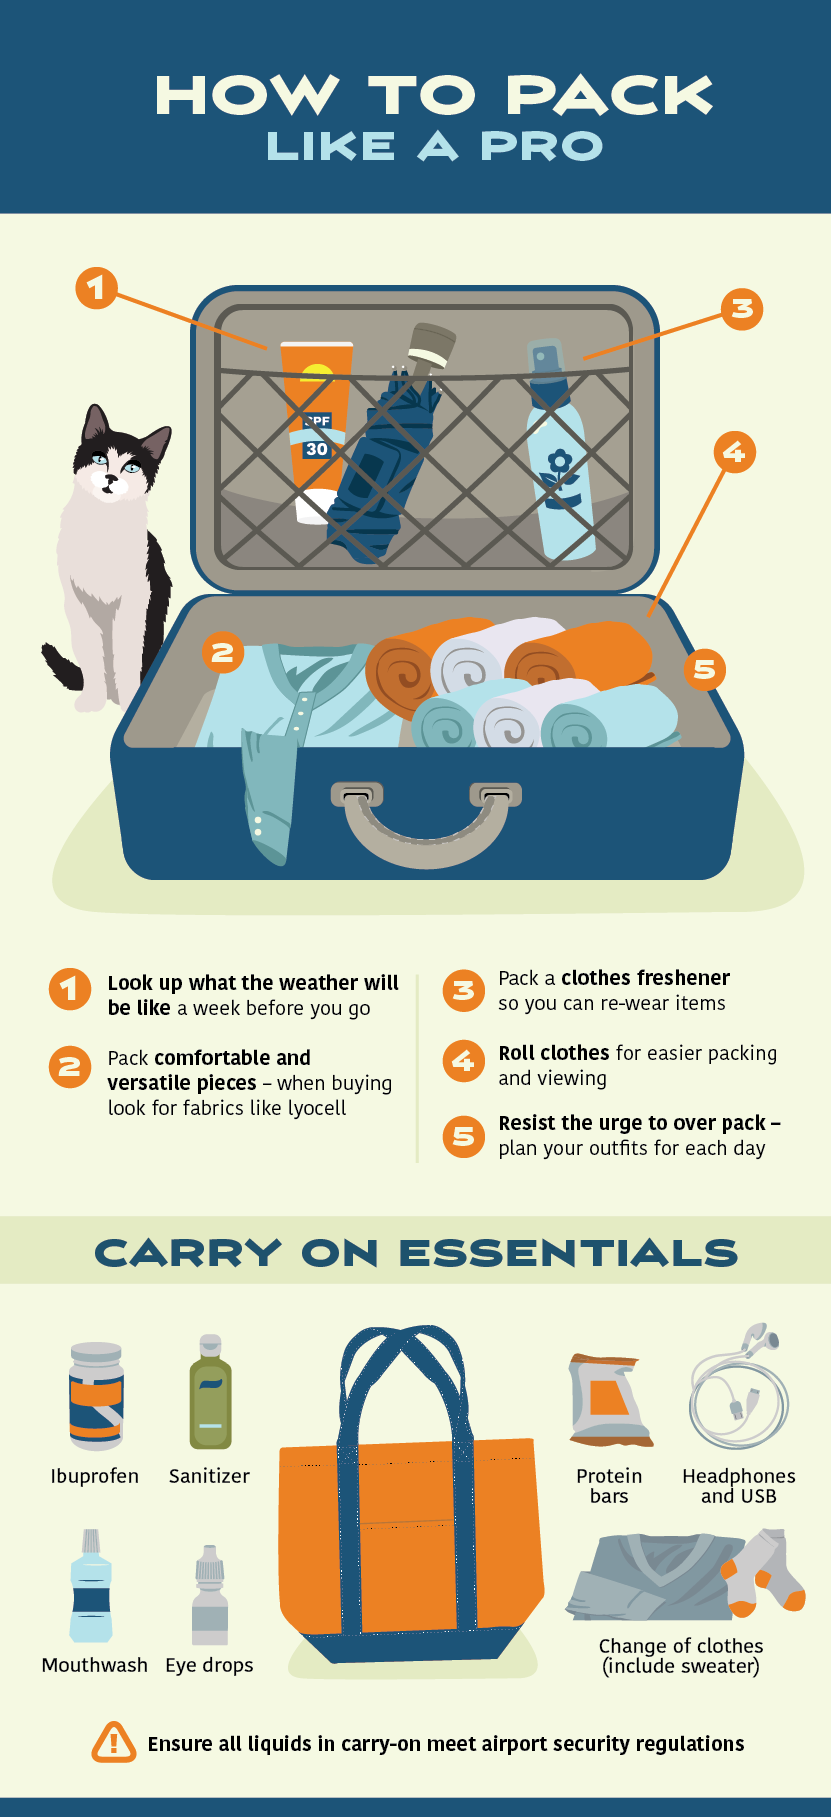 How to pack